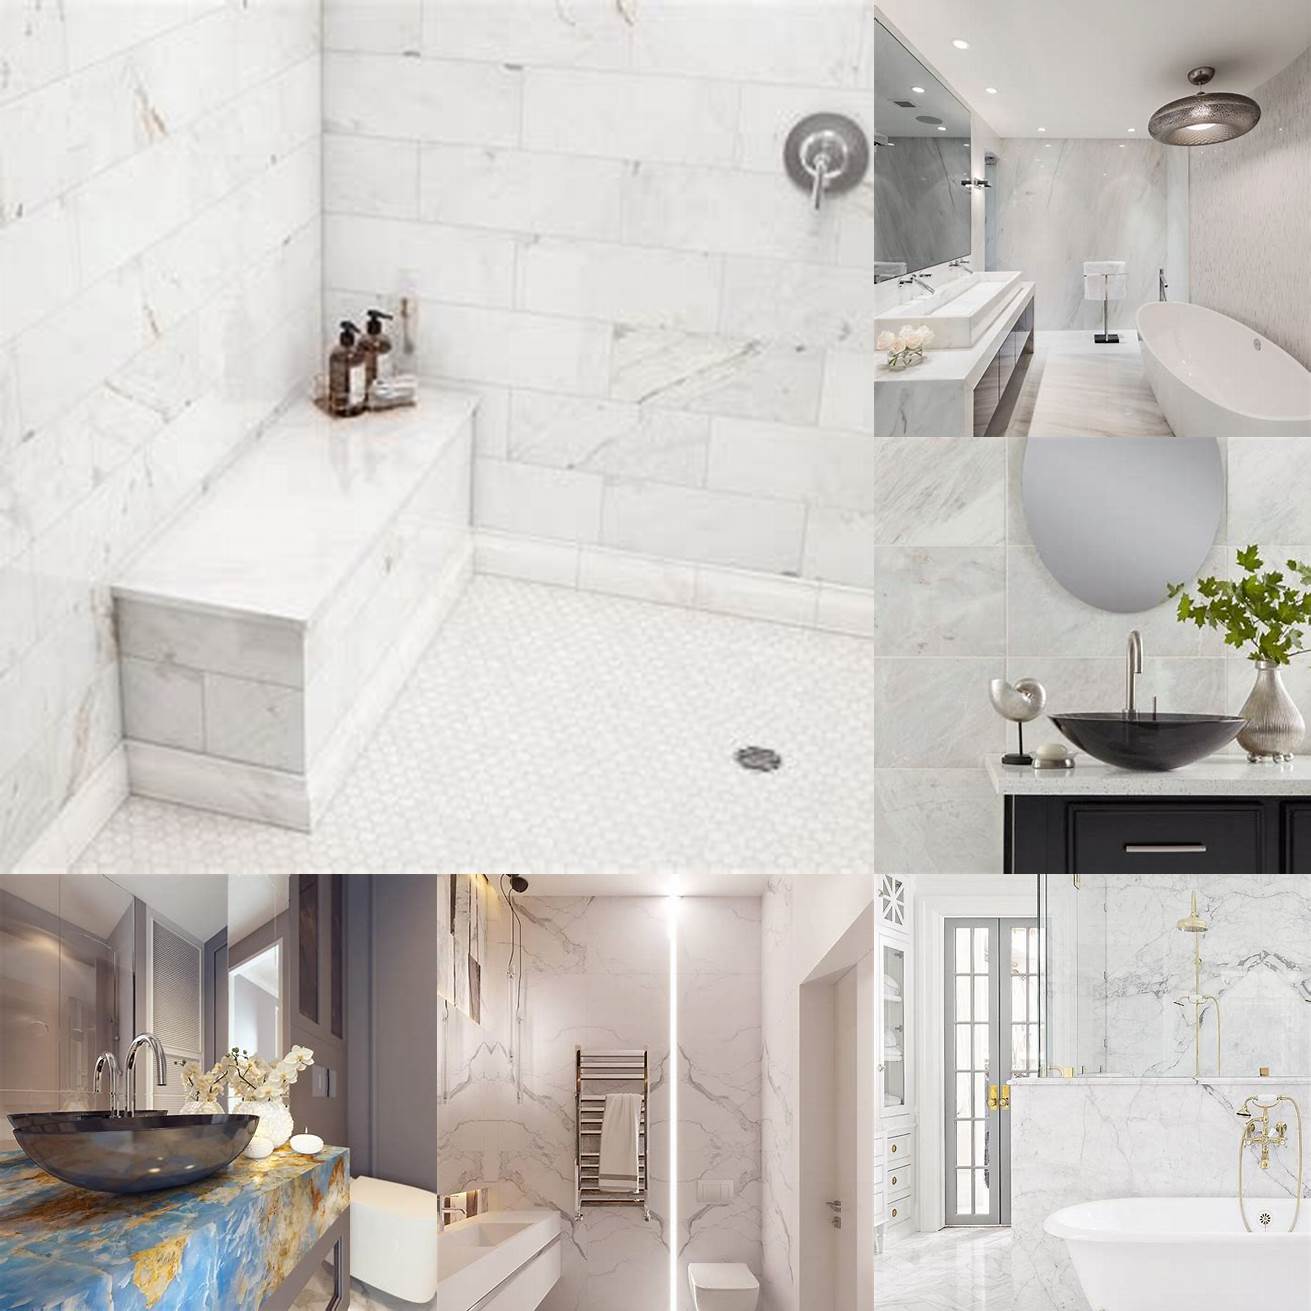 Marble A luxurious and durable material marble adds elegance and sophistication to your bathroom However it is also expensive and requires regular sealing to prevent stains